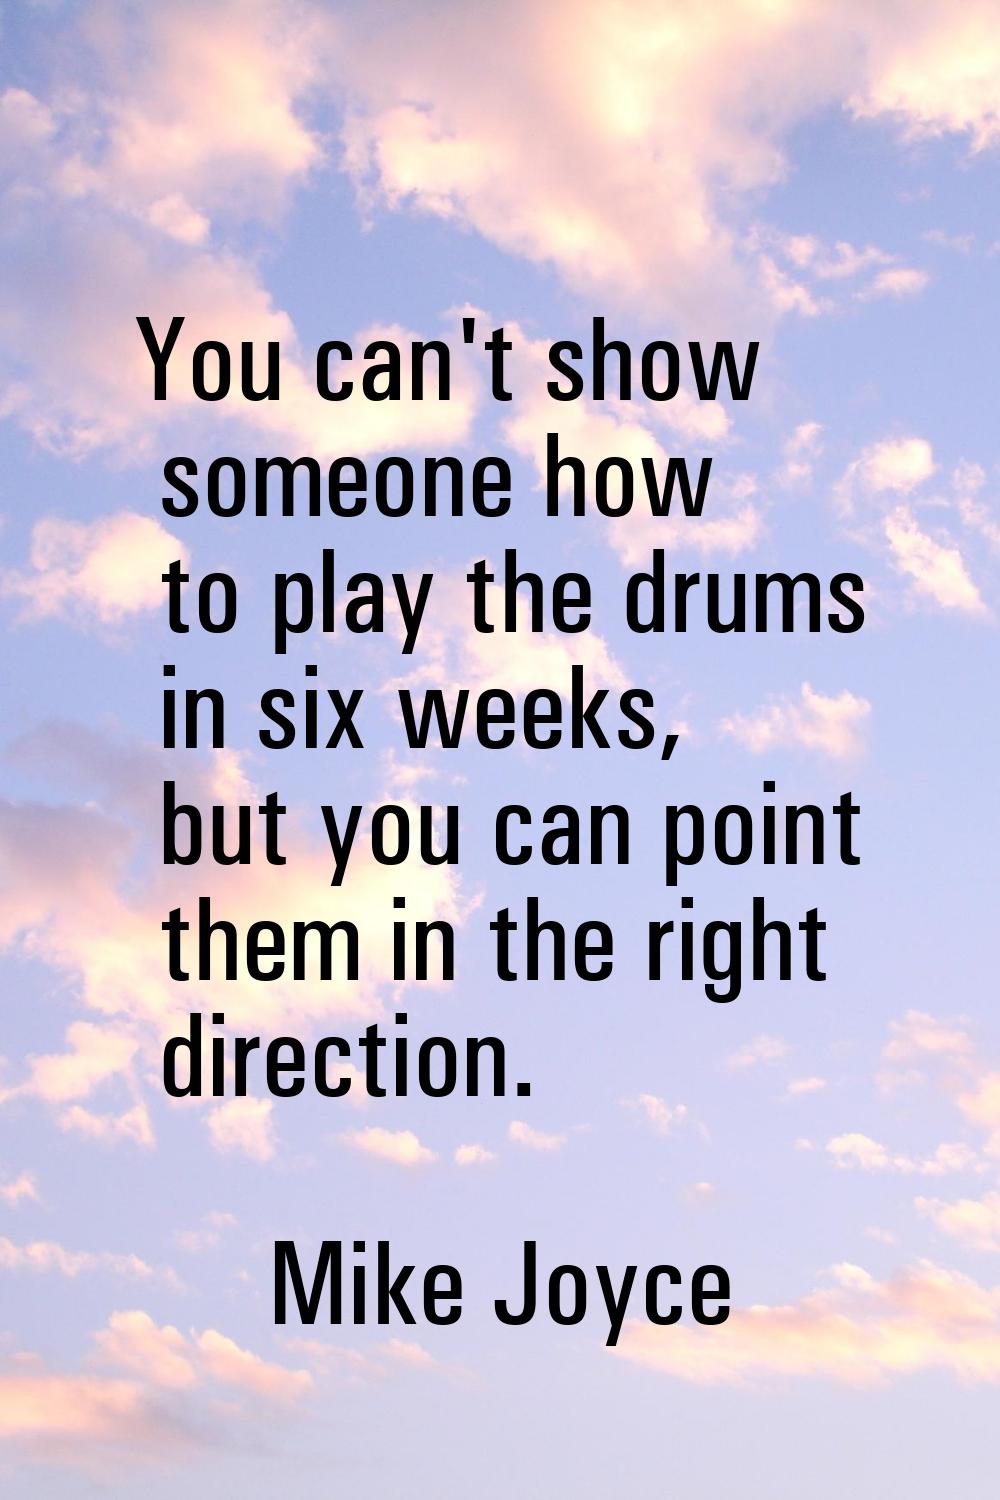 You can't show someone how to play the drums in six weeks, but you can point them in the right dire